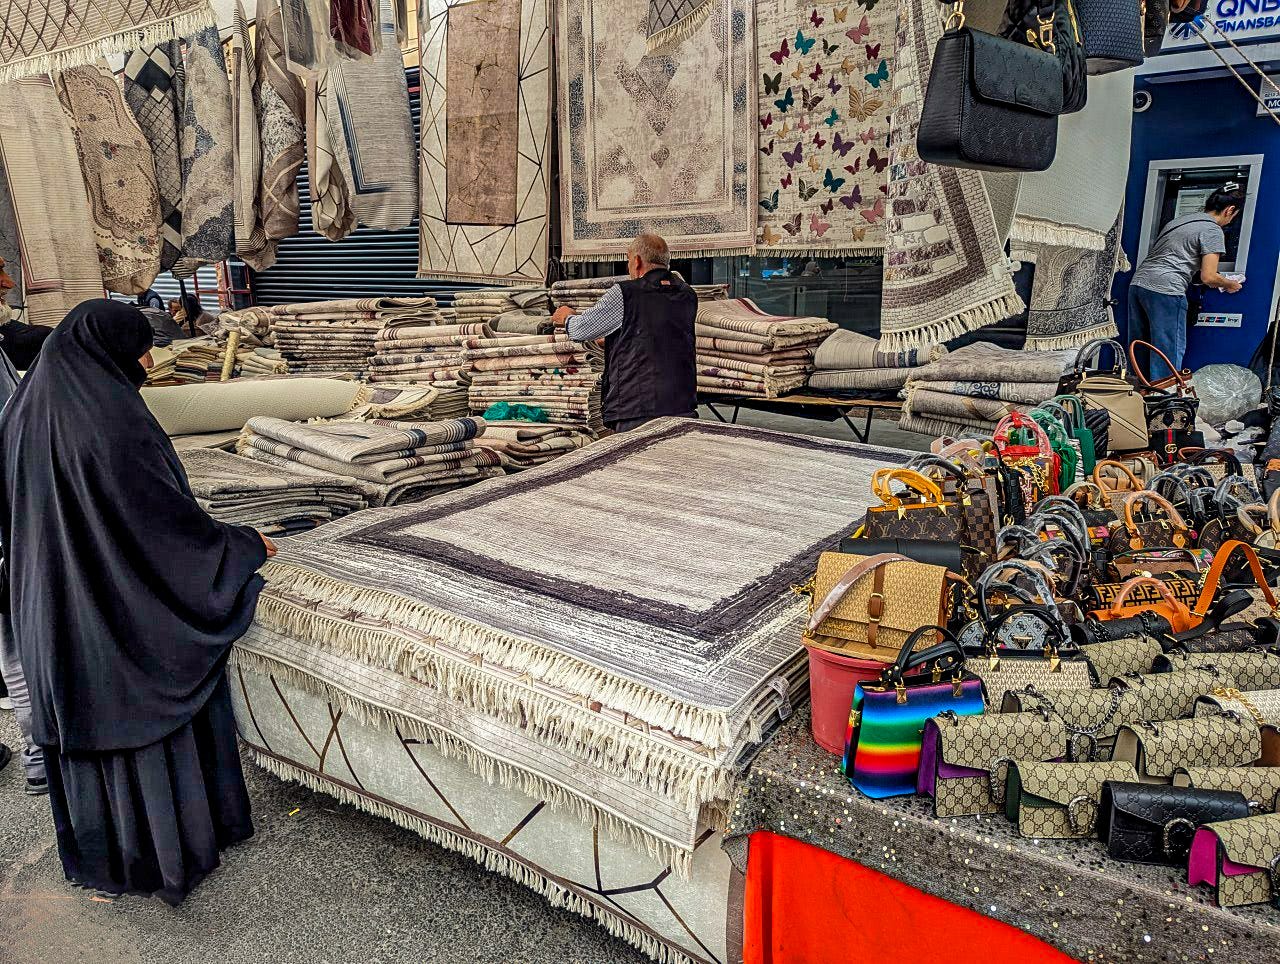 A woman dressed in a traditional black abaya looks at rugs.